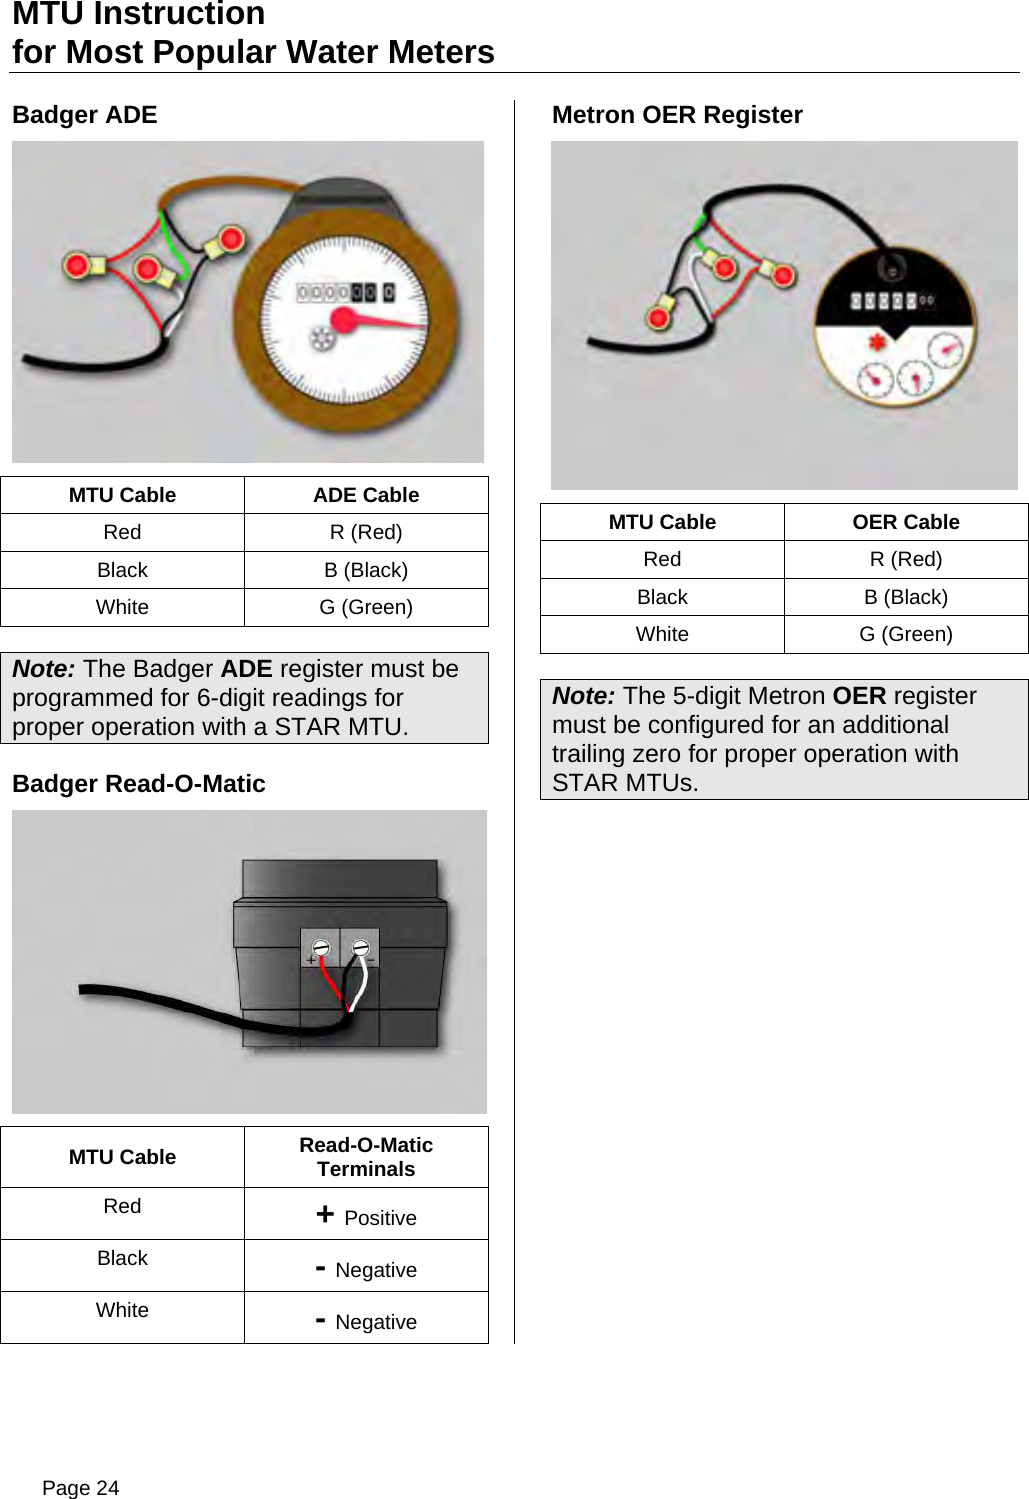 MTU Instruction for Most Popular Water Meters Badger ADE  MTU Cable  ADE Cable Red R (Red) Black B (Black) White G (Green) Note: The Badger ADE register must be programmed for 6-digit readings for proper operation with a STAR MTU. Badger Read-O-Matic  MTU Cable  Read-O-Matic Terminals Red  + Positive Black  - Negative White  - Negative Metron OER Register  MTU Cable  OER Cable Red R (Red) Black B (Black) White G (Green) Note: The 5-digit Metron OER register must be configured for an additional trailing zero for proper operation with STAR MTUs. Page 24